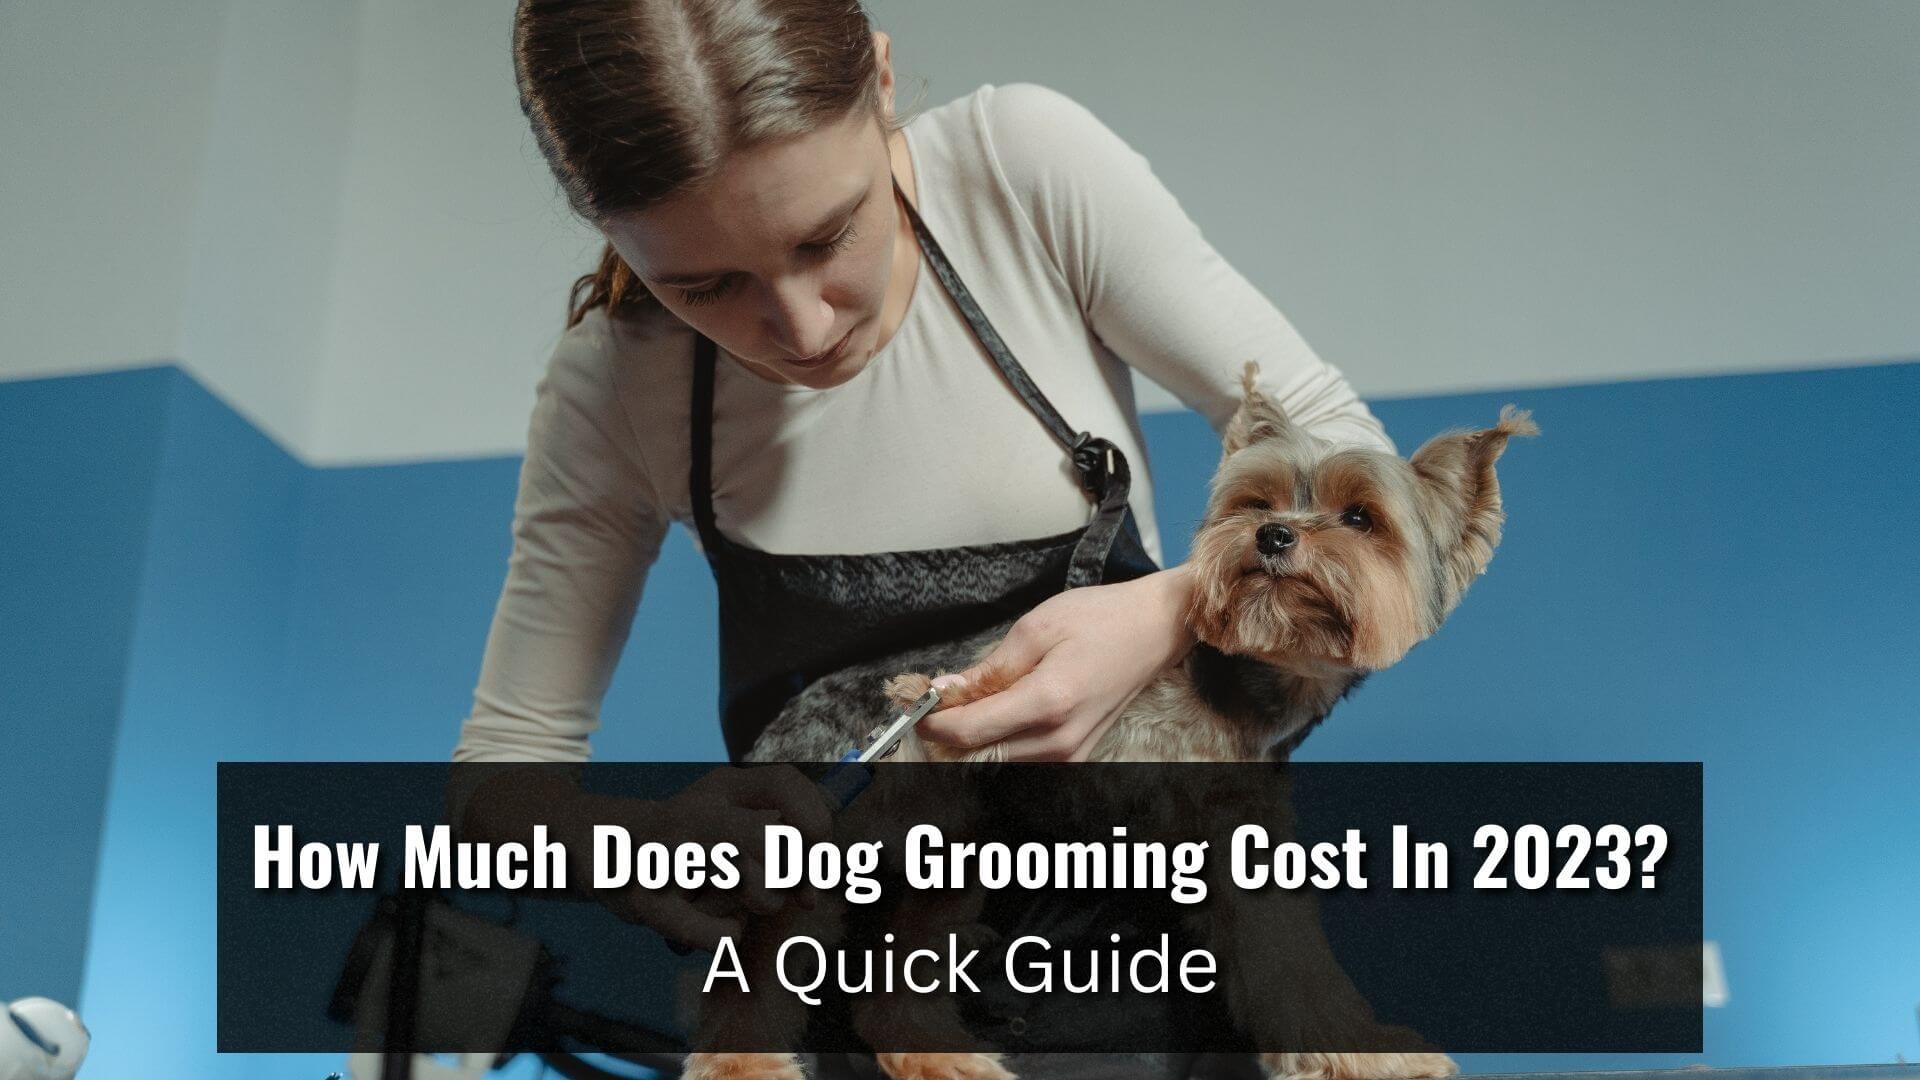 How much does dog grooming cost? Learn more about how much dog grooming costs and how to set the prices right for your pet care services!